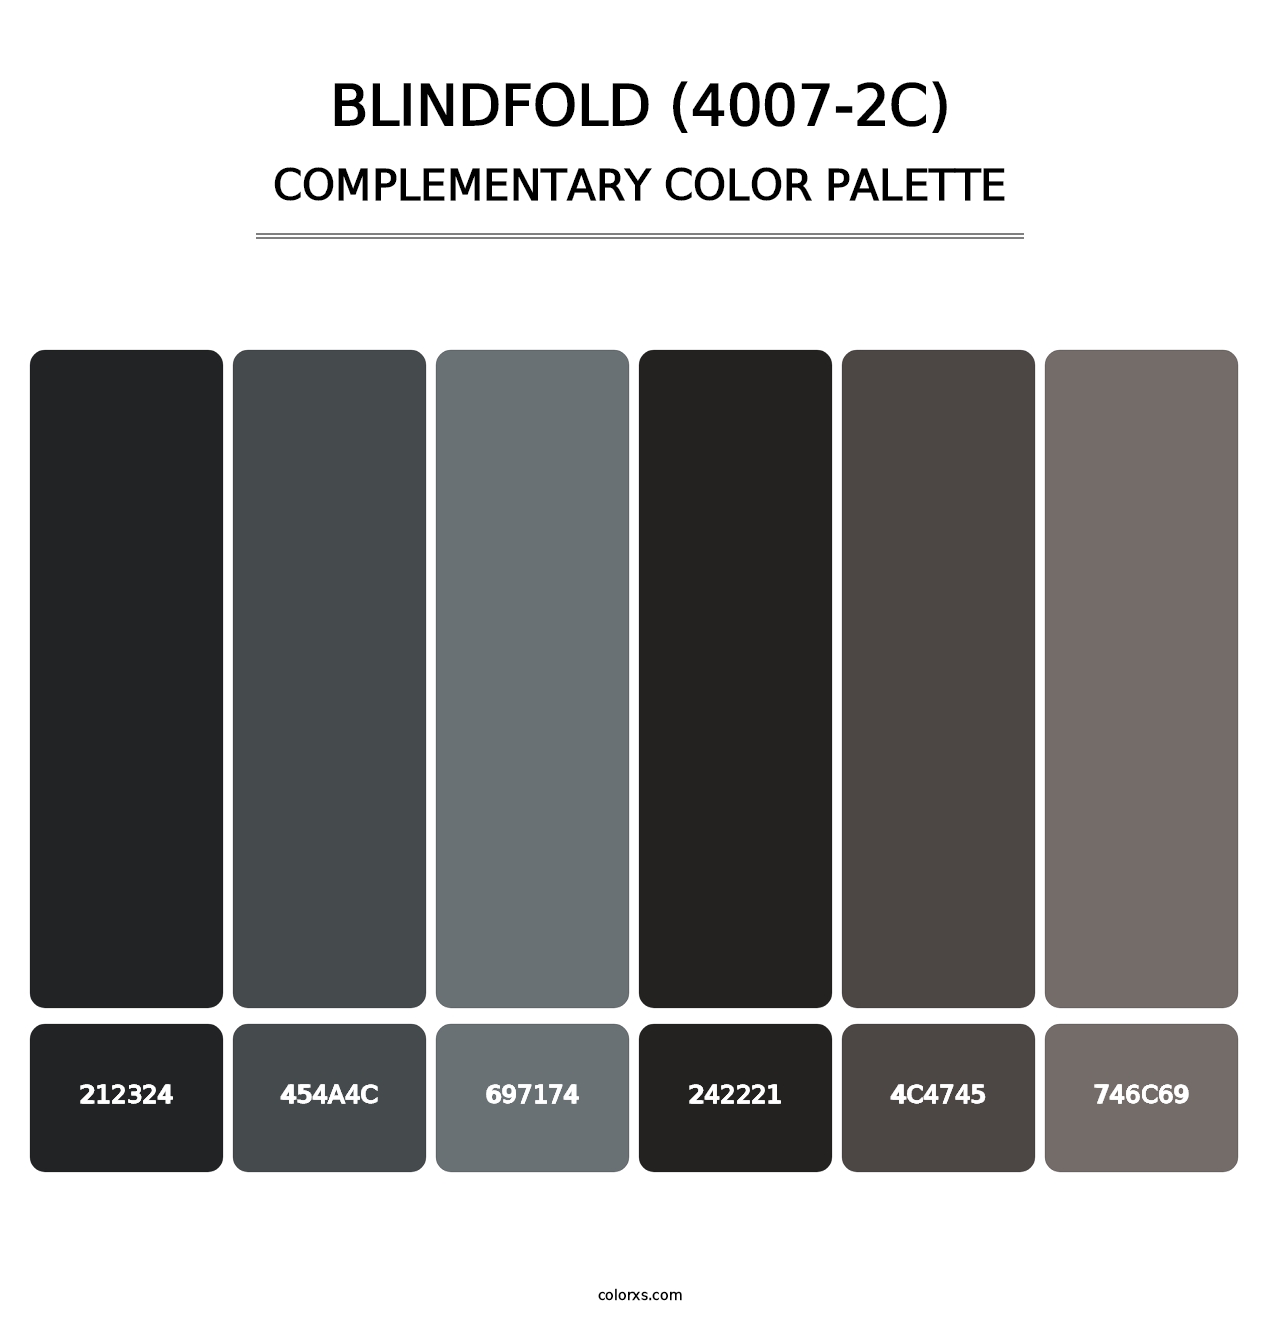 Blindfold (4007-2C) - Complementary Color Palette